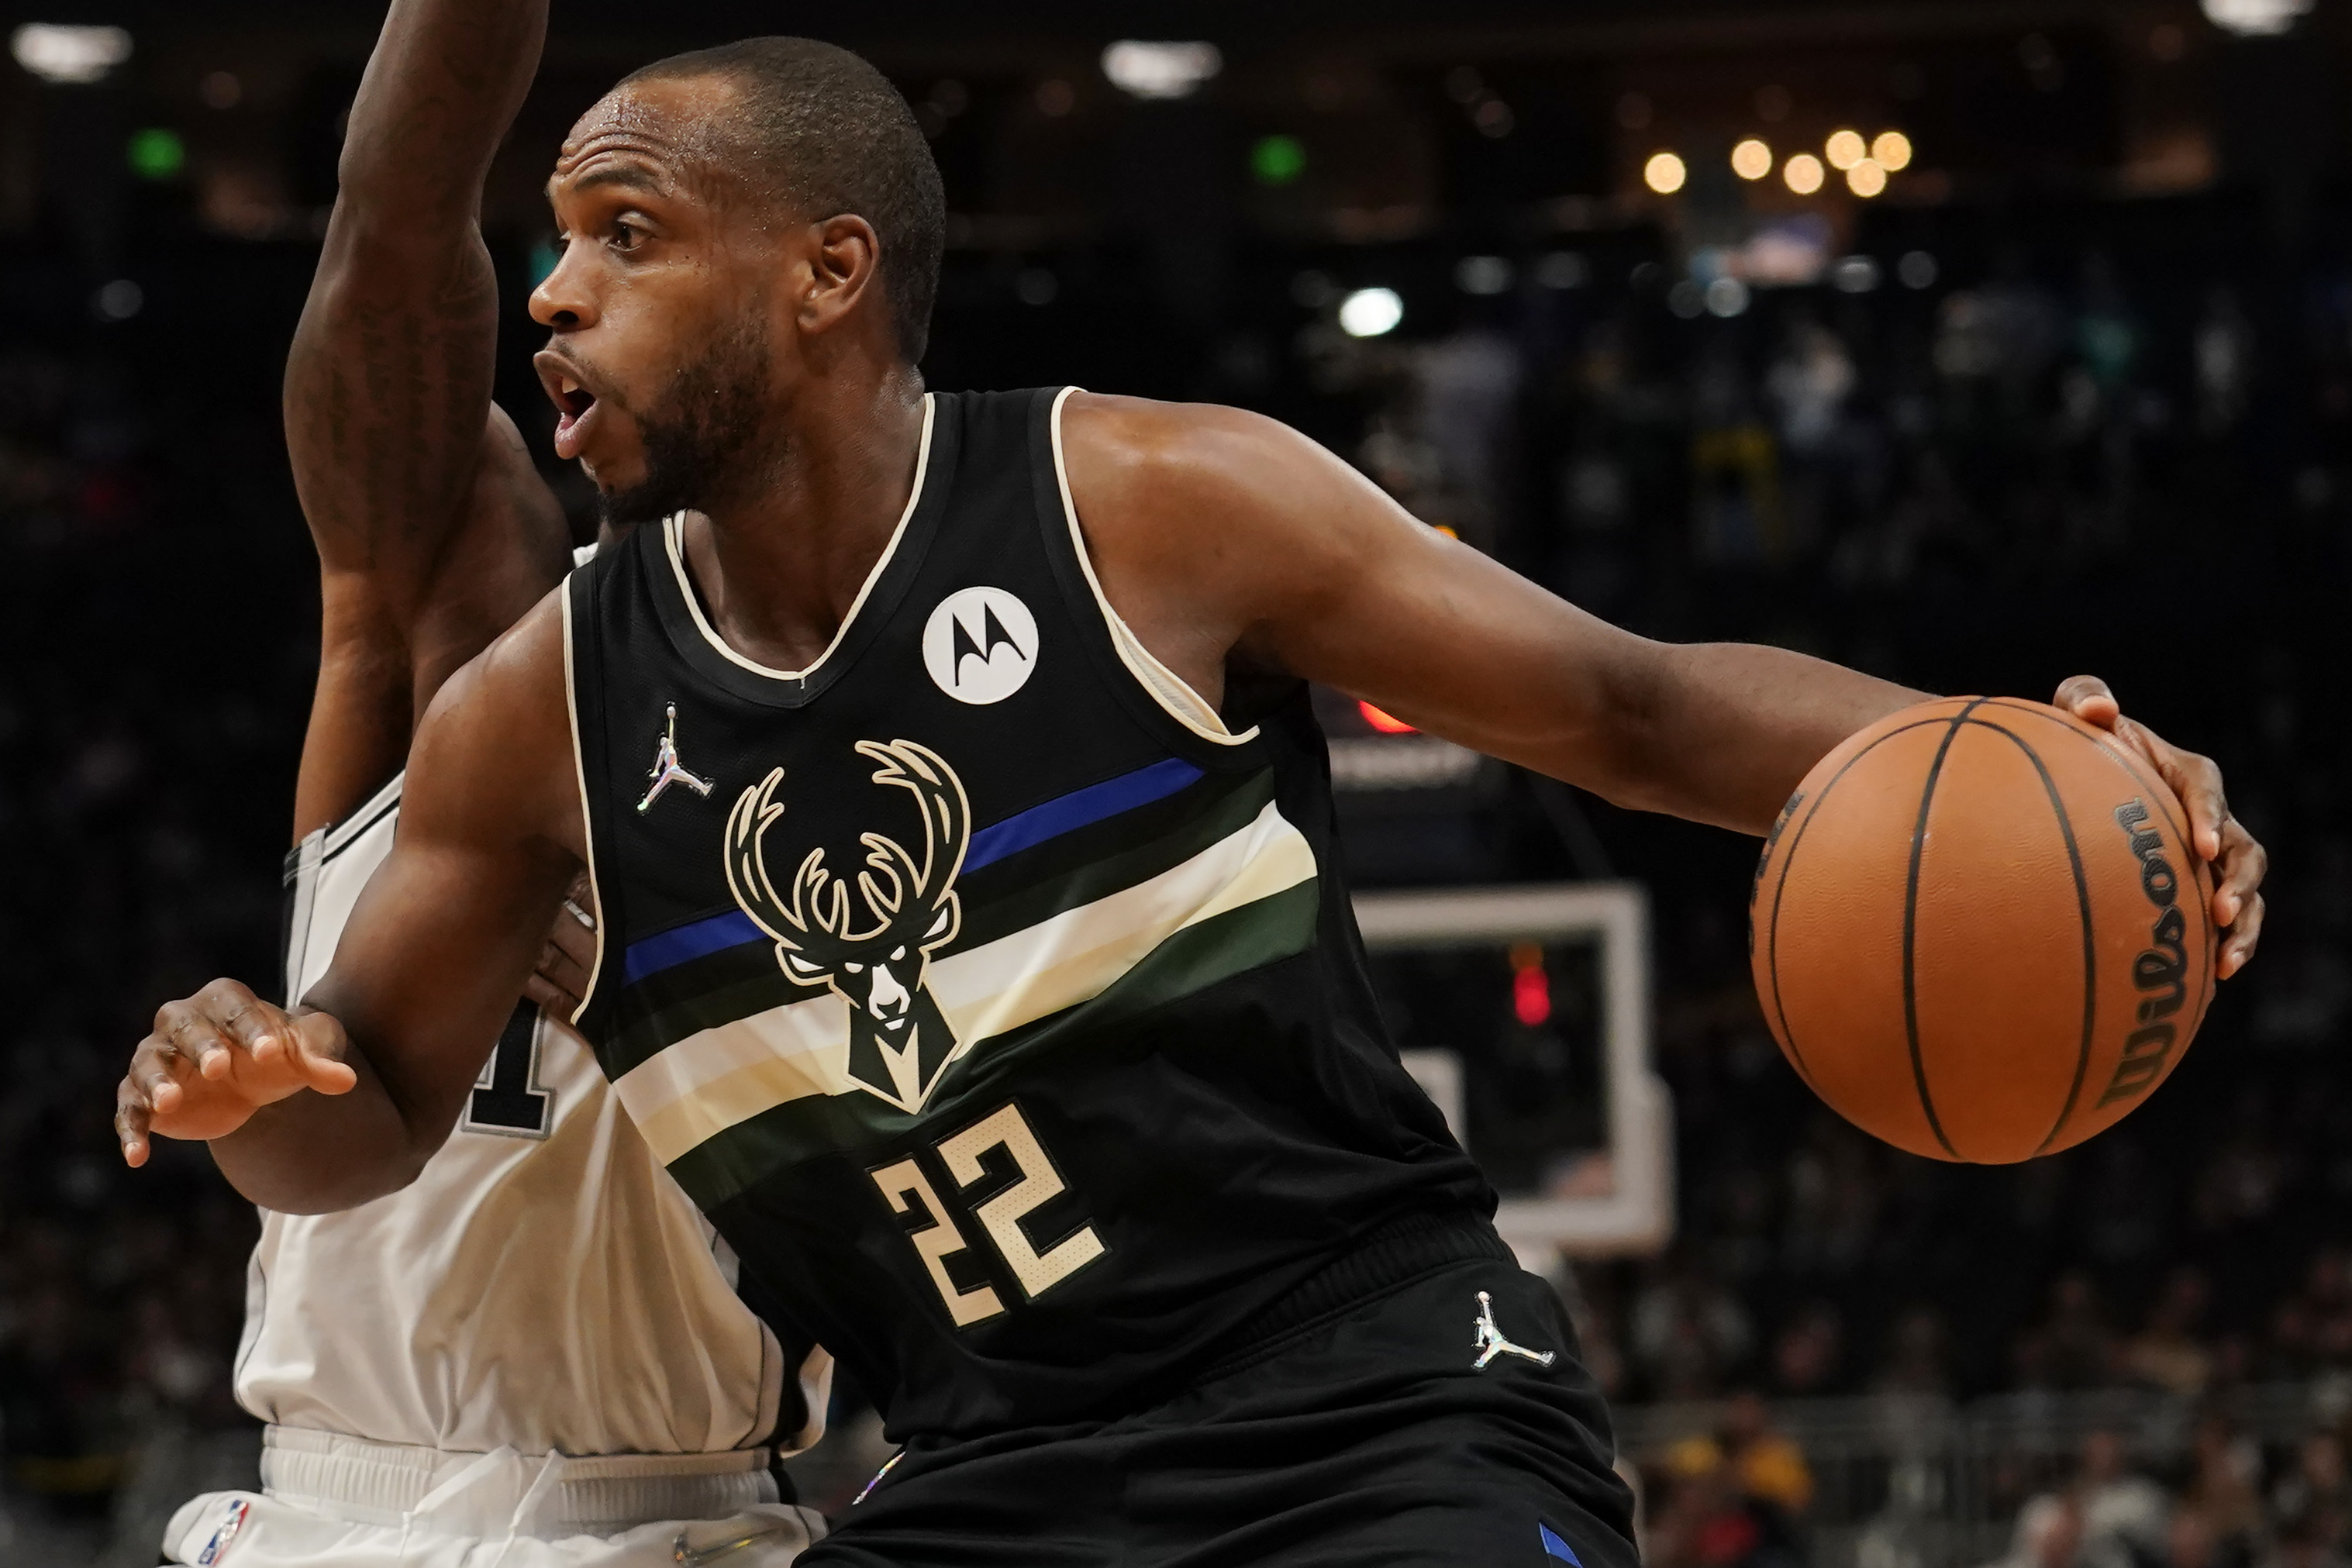 Khris Middleton was dunked on by Giannis Antetokounmpo at World Cup